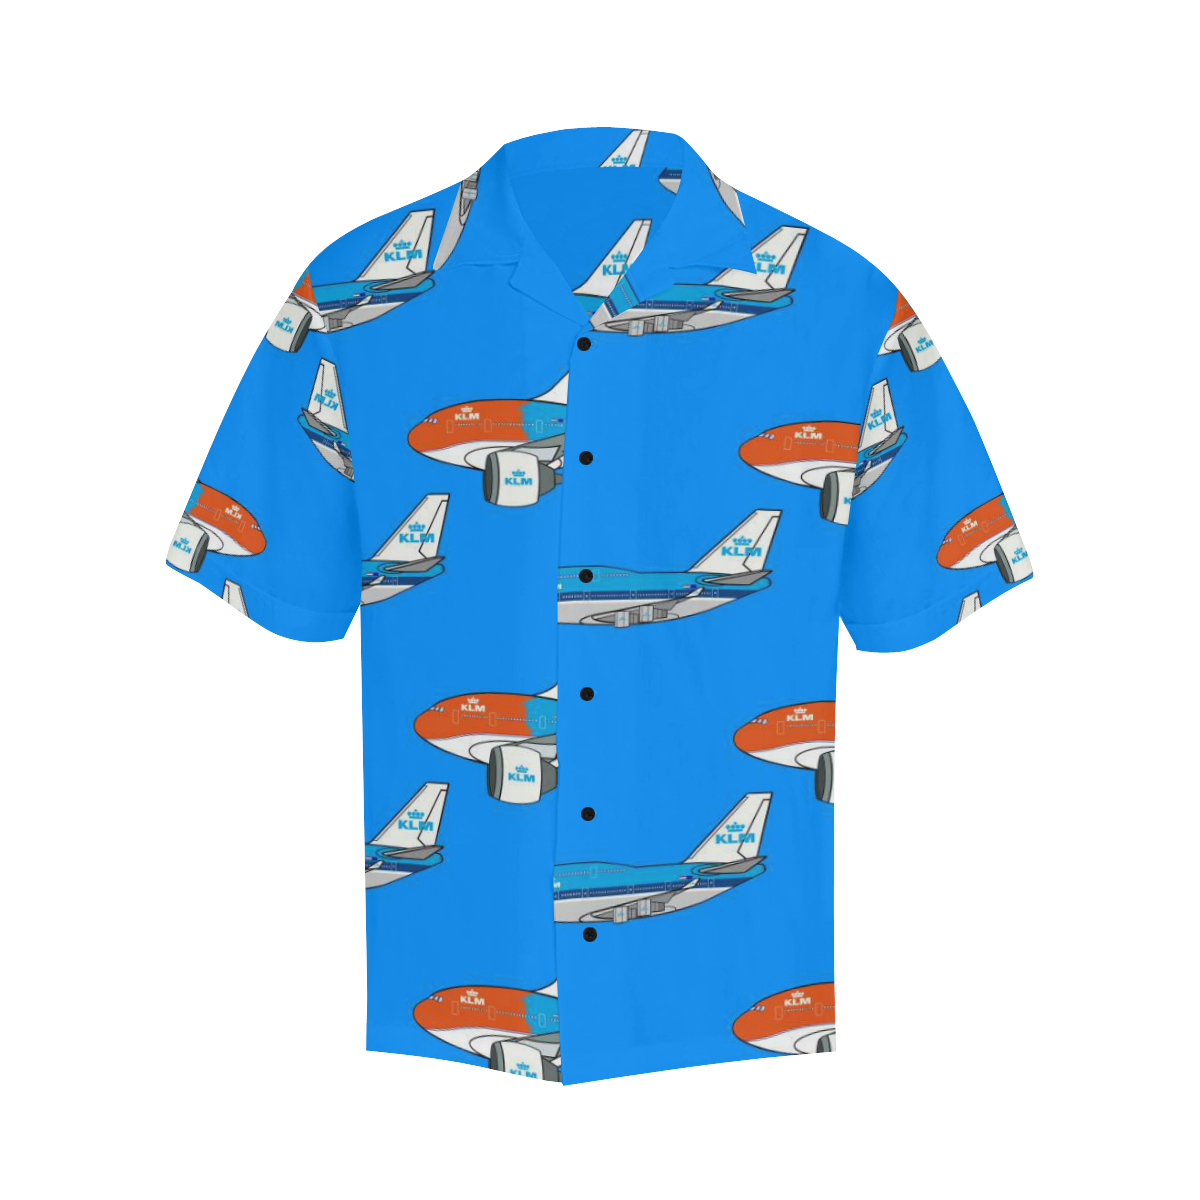 Front image of 747 light blue Hawaiian shirt. Short Sleeves and notch lapel collar is visible.